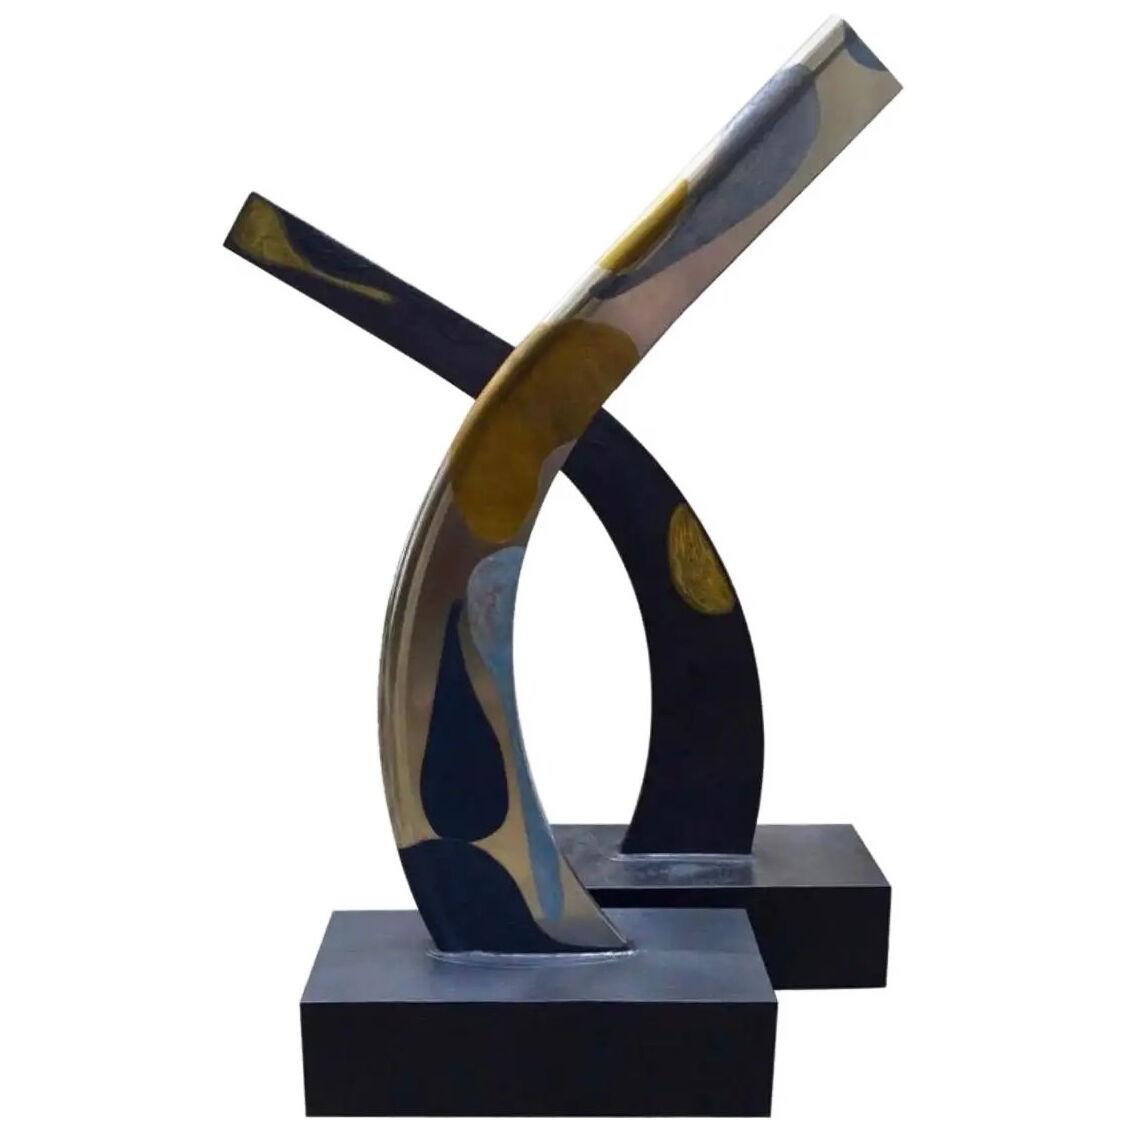 Contemporary Wood and Zinc Sculpture Indoor by Marielle Guégan, 2014